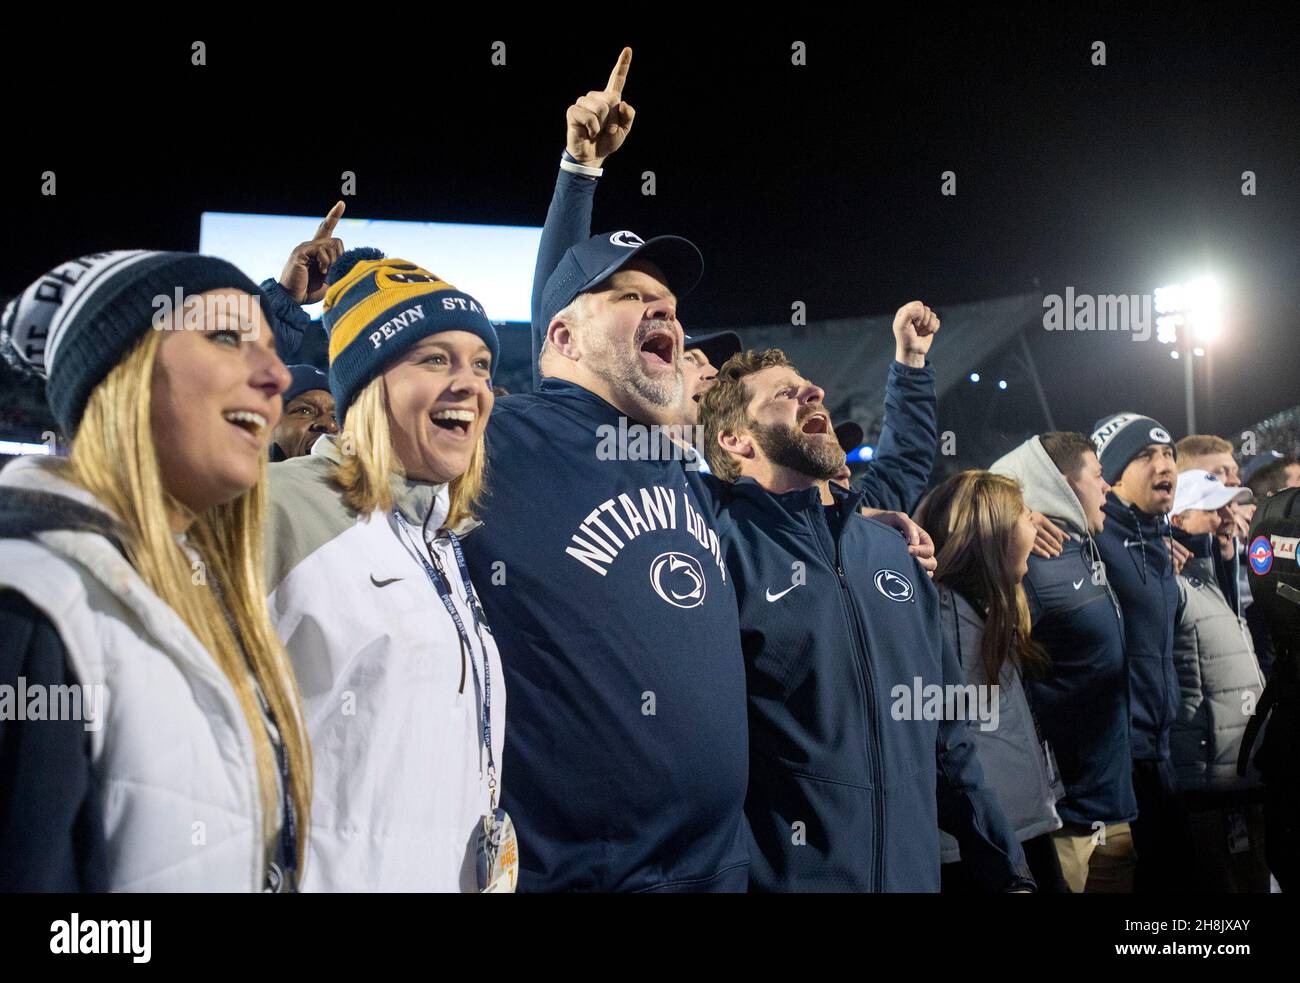 University Park, USA. 26th Nov, 2016. Penn State offensive line coach Matt Limegrover and defensive coordinator Brent Pry sing the alma mater and celebrate with the team after a 45-12 win against Michigan State at Beaver Stadium in University Park, Pennsylvania, on Saturday, Nov. 26, 2016. (Photo by Abby Drey/Centre Daily Times/TNS/Sipa USA) Credit: Sipa USA/Alamy Live News Stock Photo